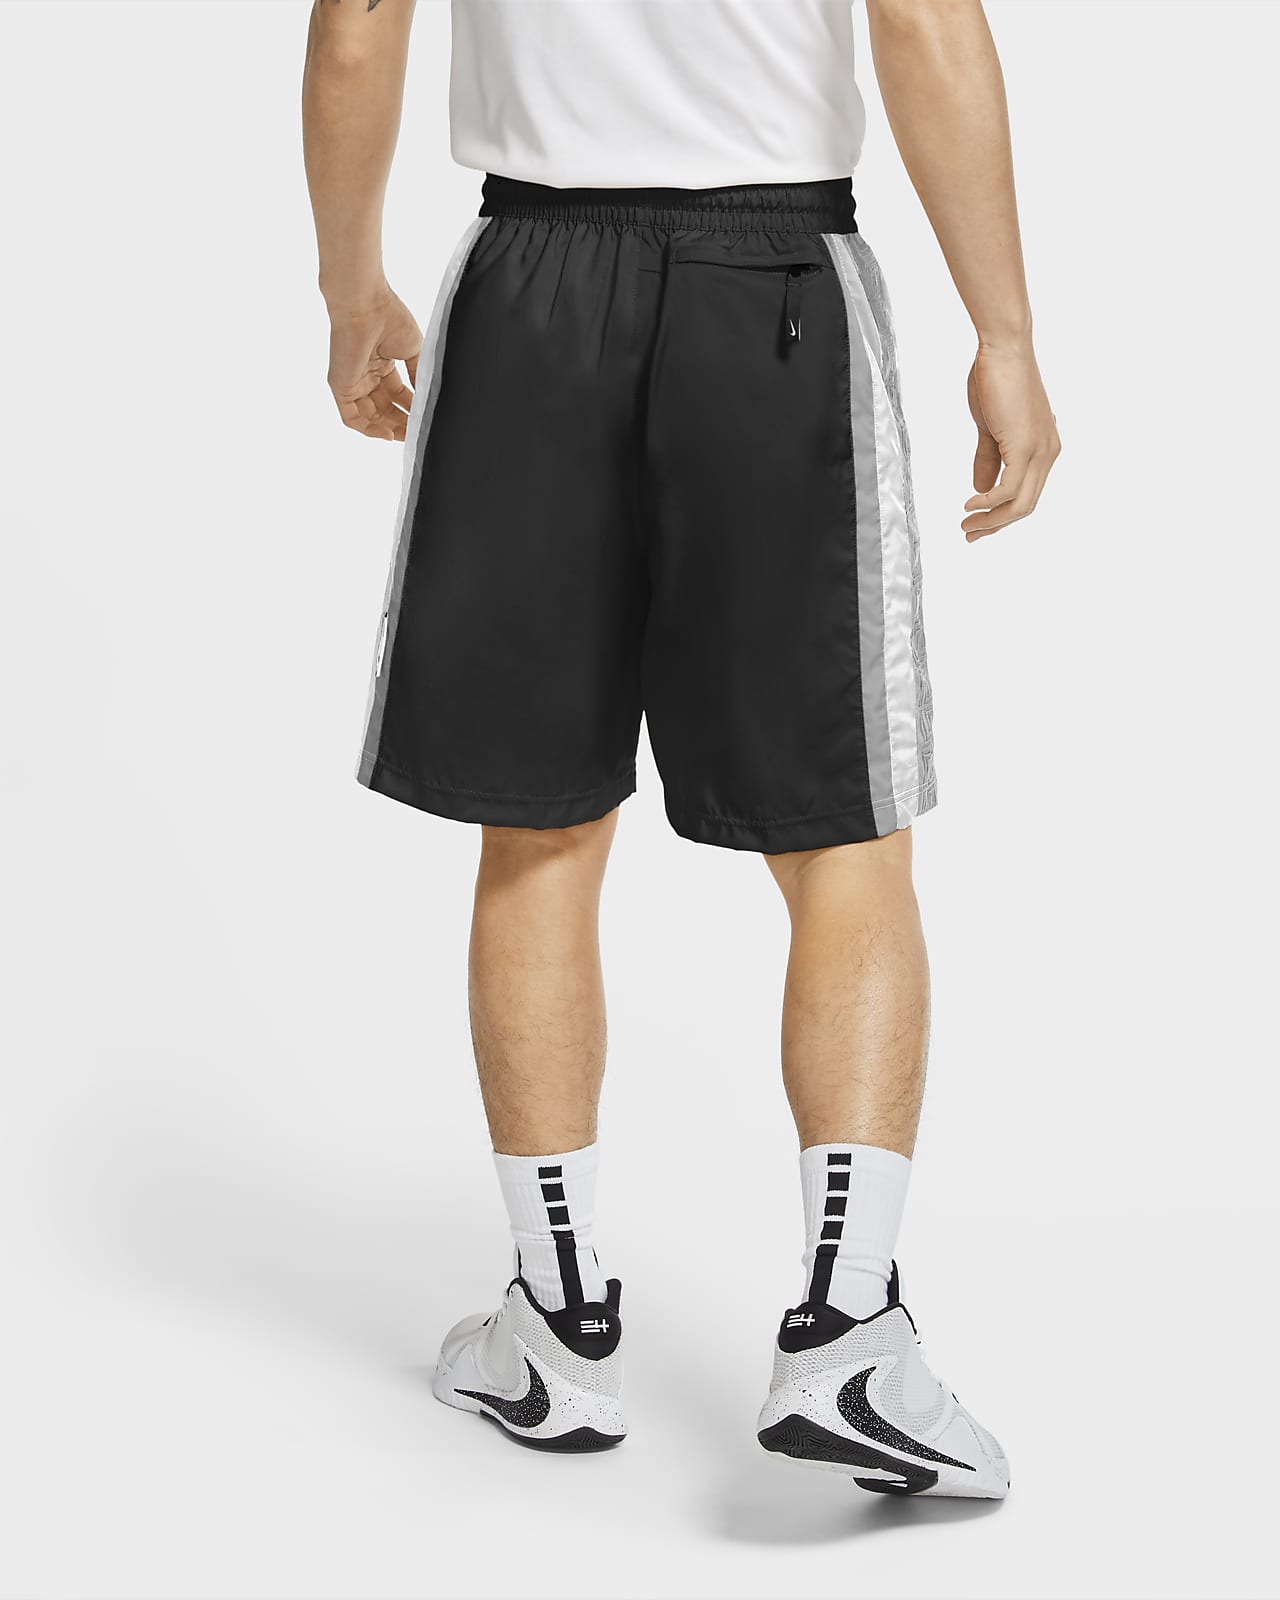 giannis nike clothes